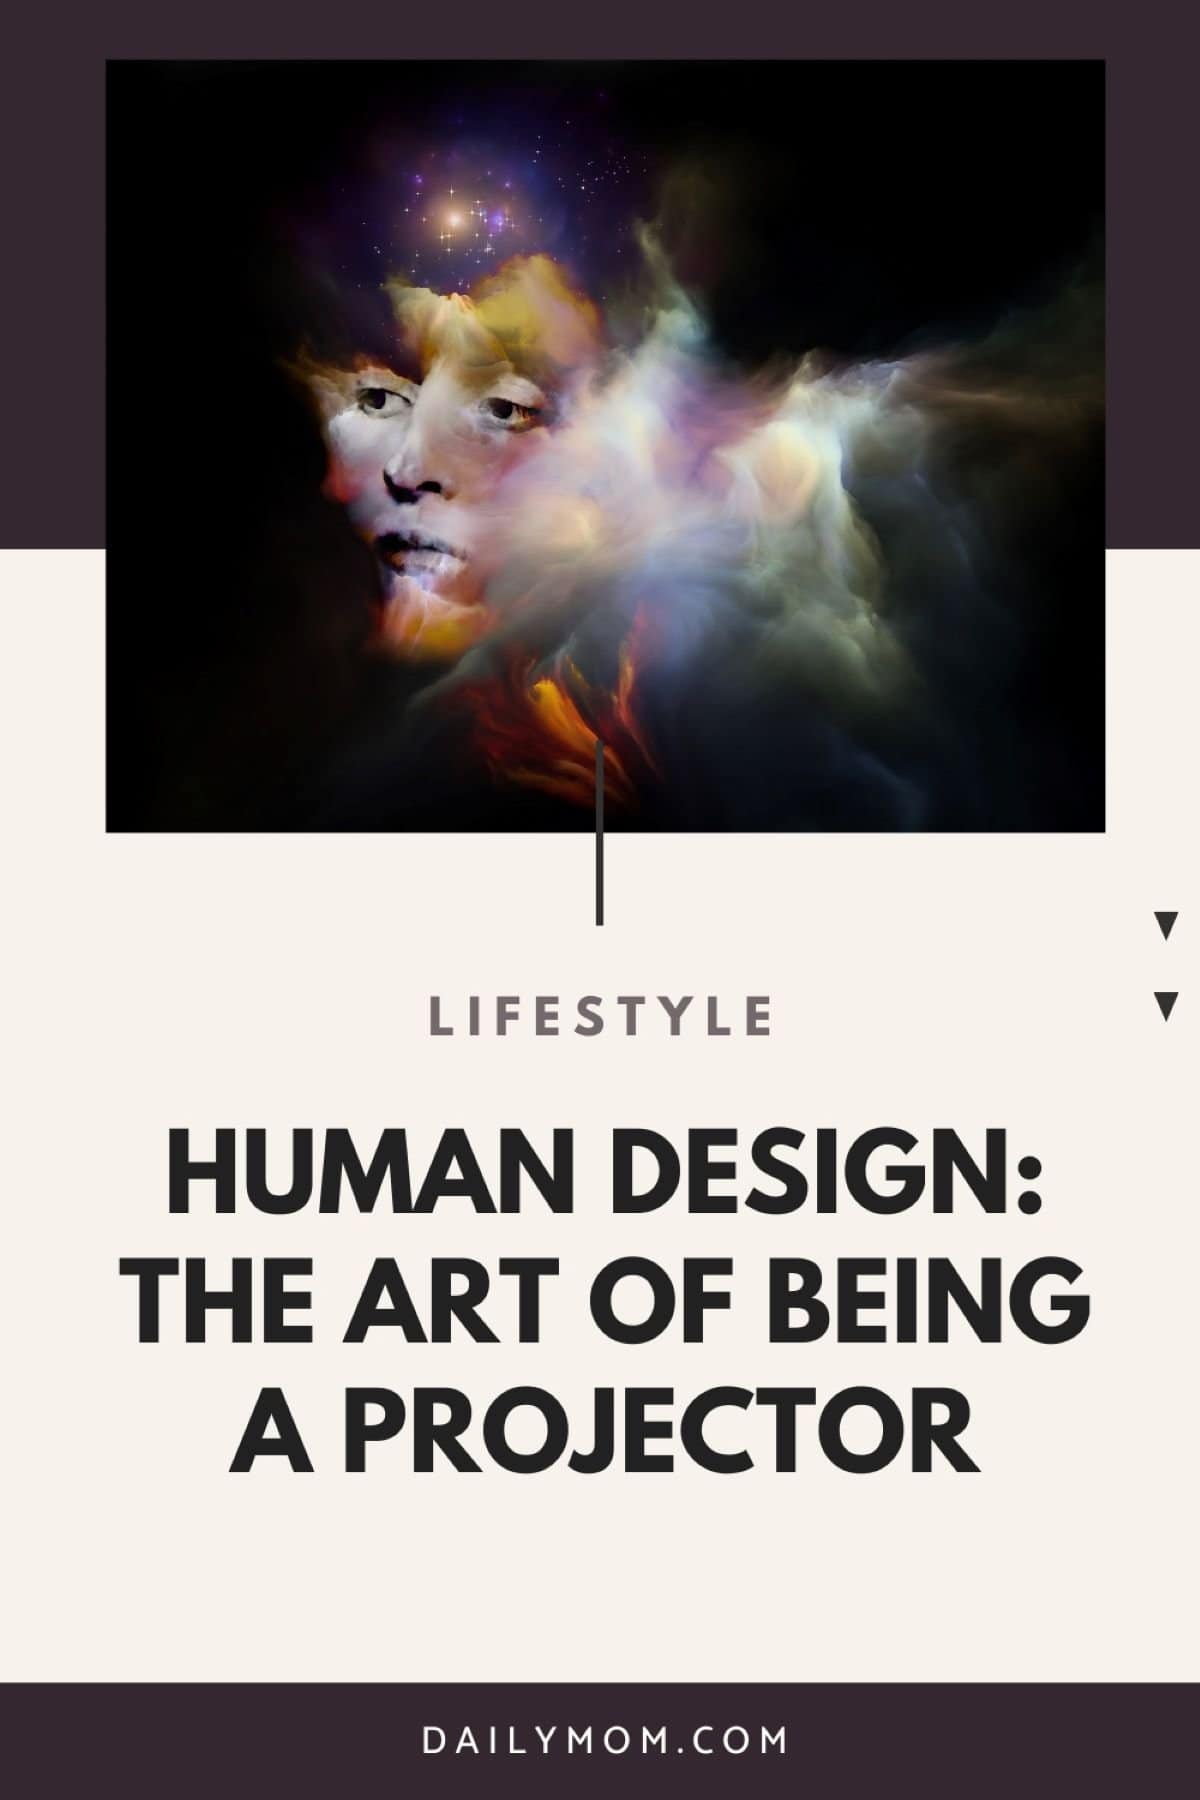 Human Design Projector Energy Type: 6 Strengths And The Art Of Being A Projector Type In Human Design 7 Daily Mom, Magazine For Families